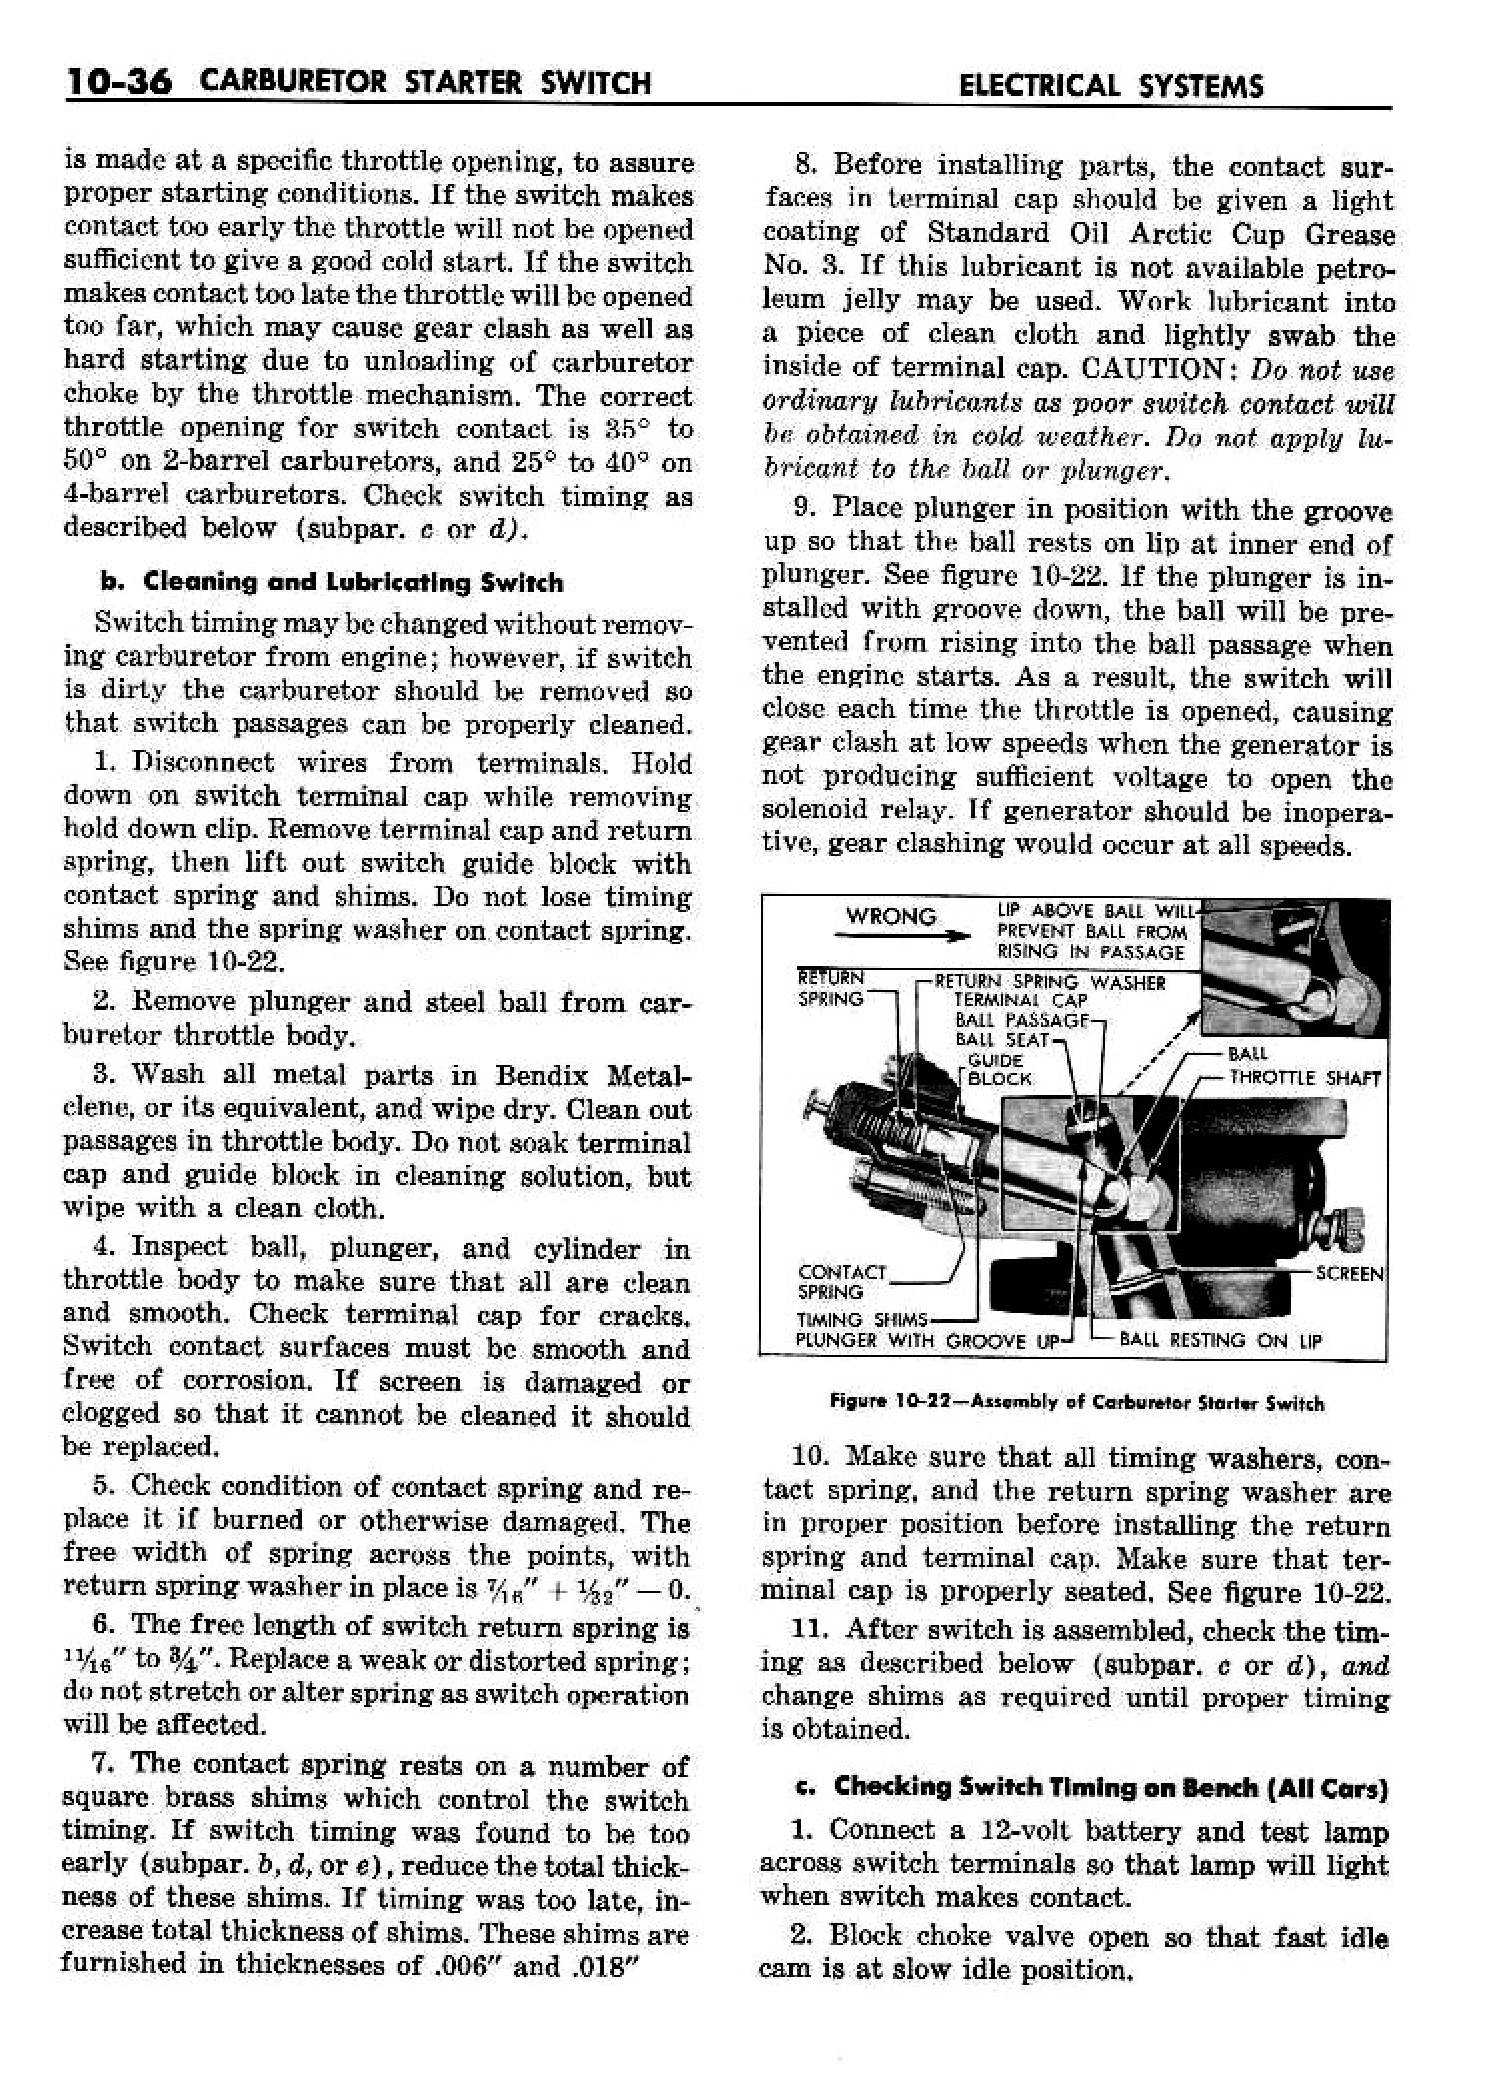 n_11 1958 Buick Shop Manual - Electrical Systems_36.jpg